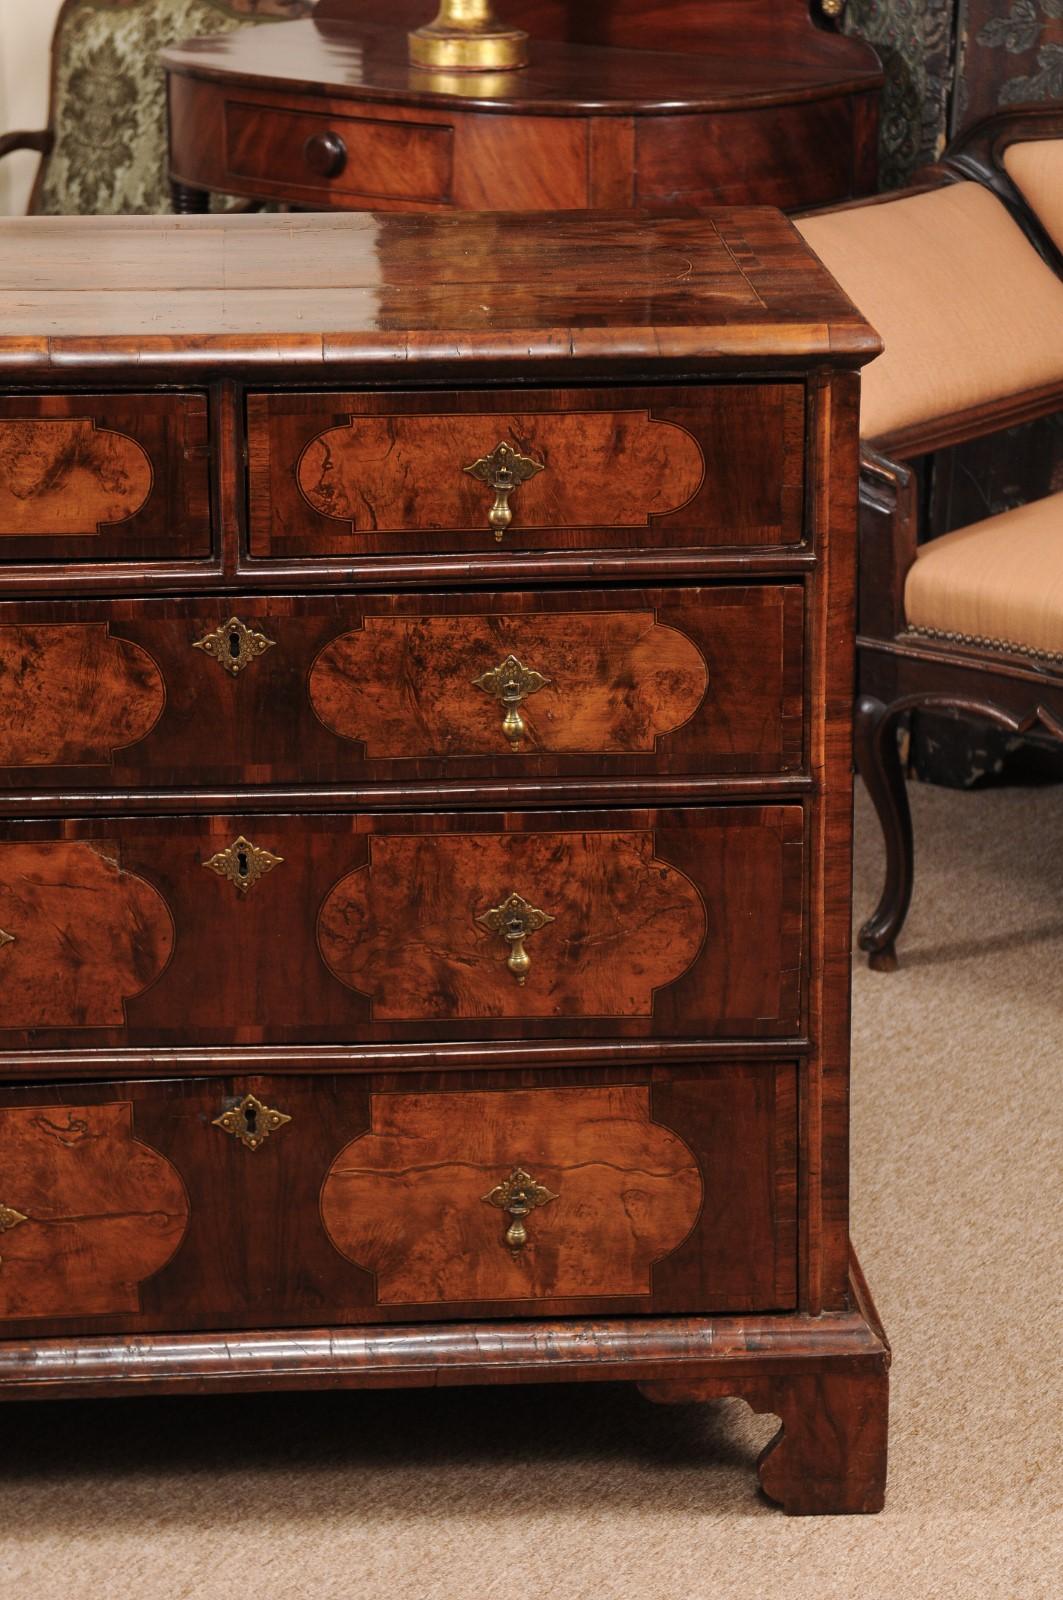 The William & Mary chest with string Inlay and five burled walnut paneled drawers with brass tear drop pulls terminating in ogee feet.